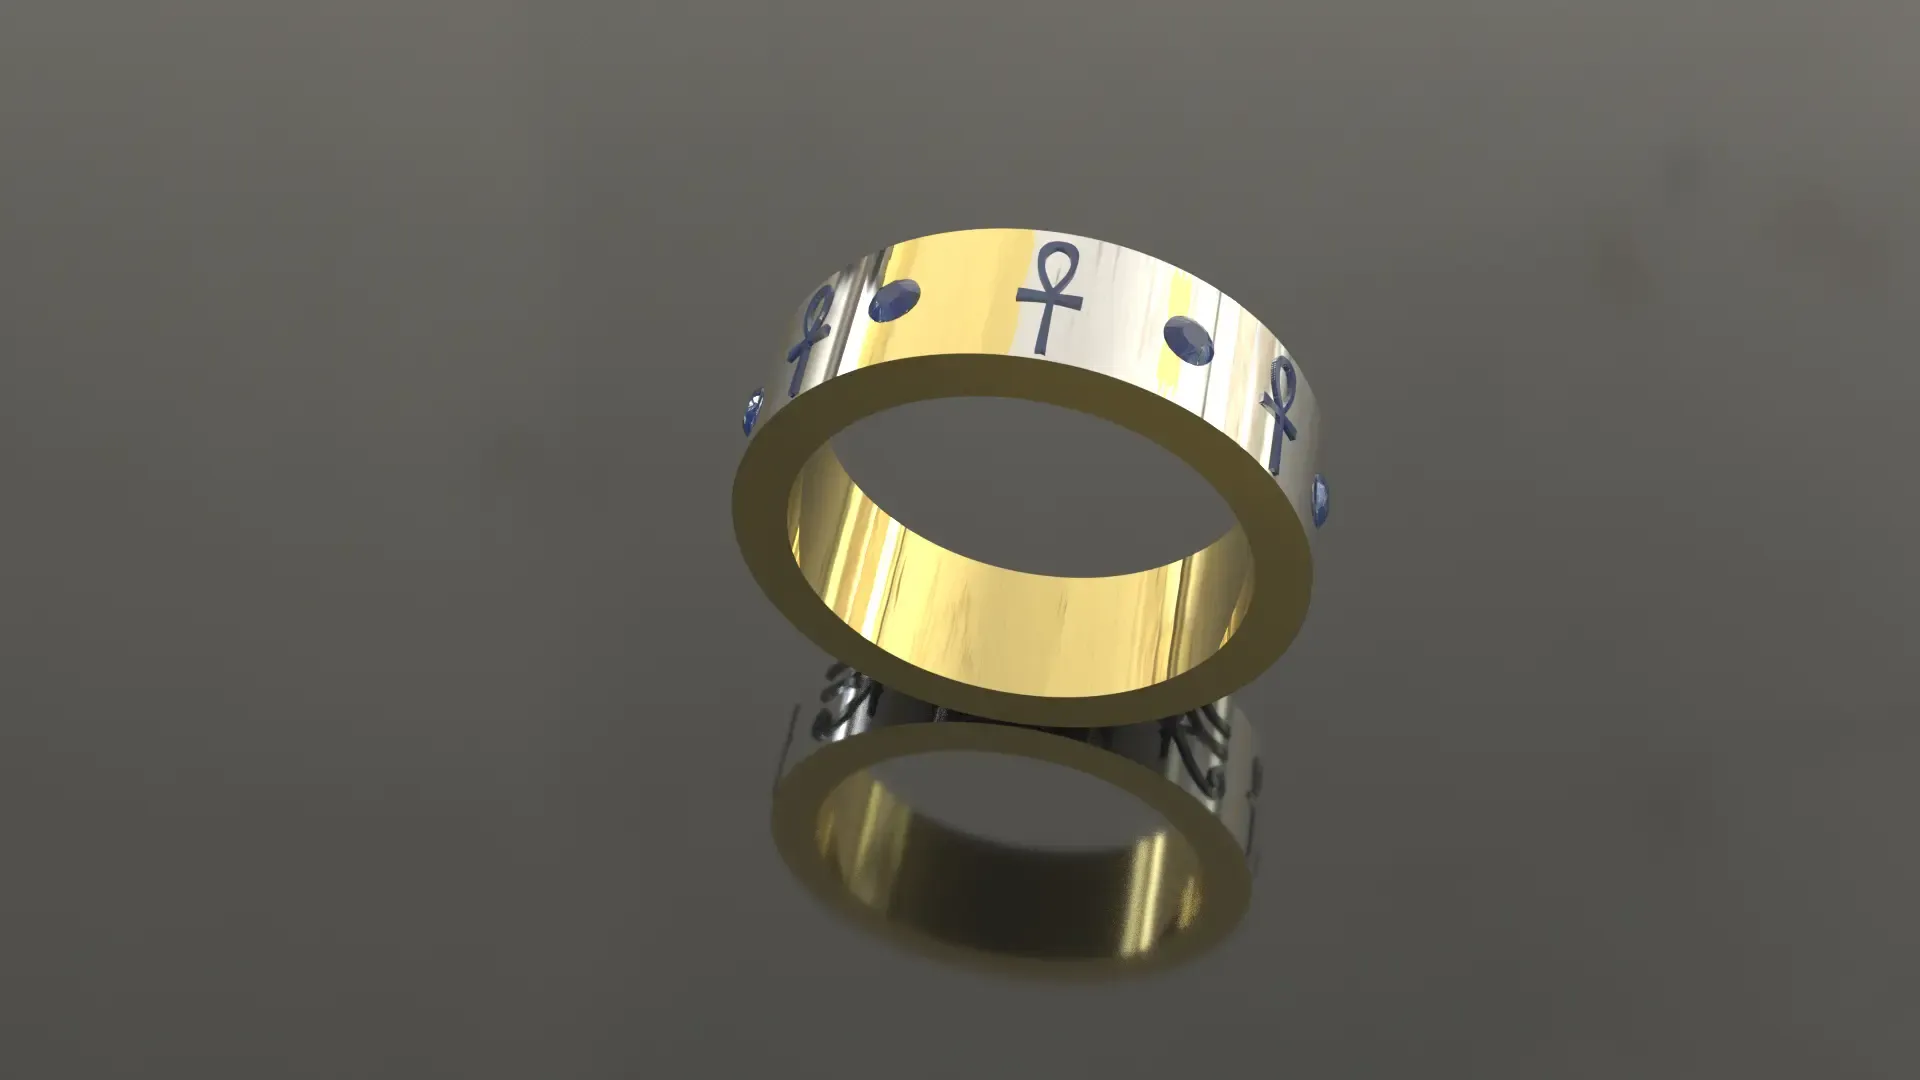 Ankh & eyes ring new version: details more visible X4 RINGS